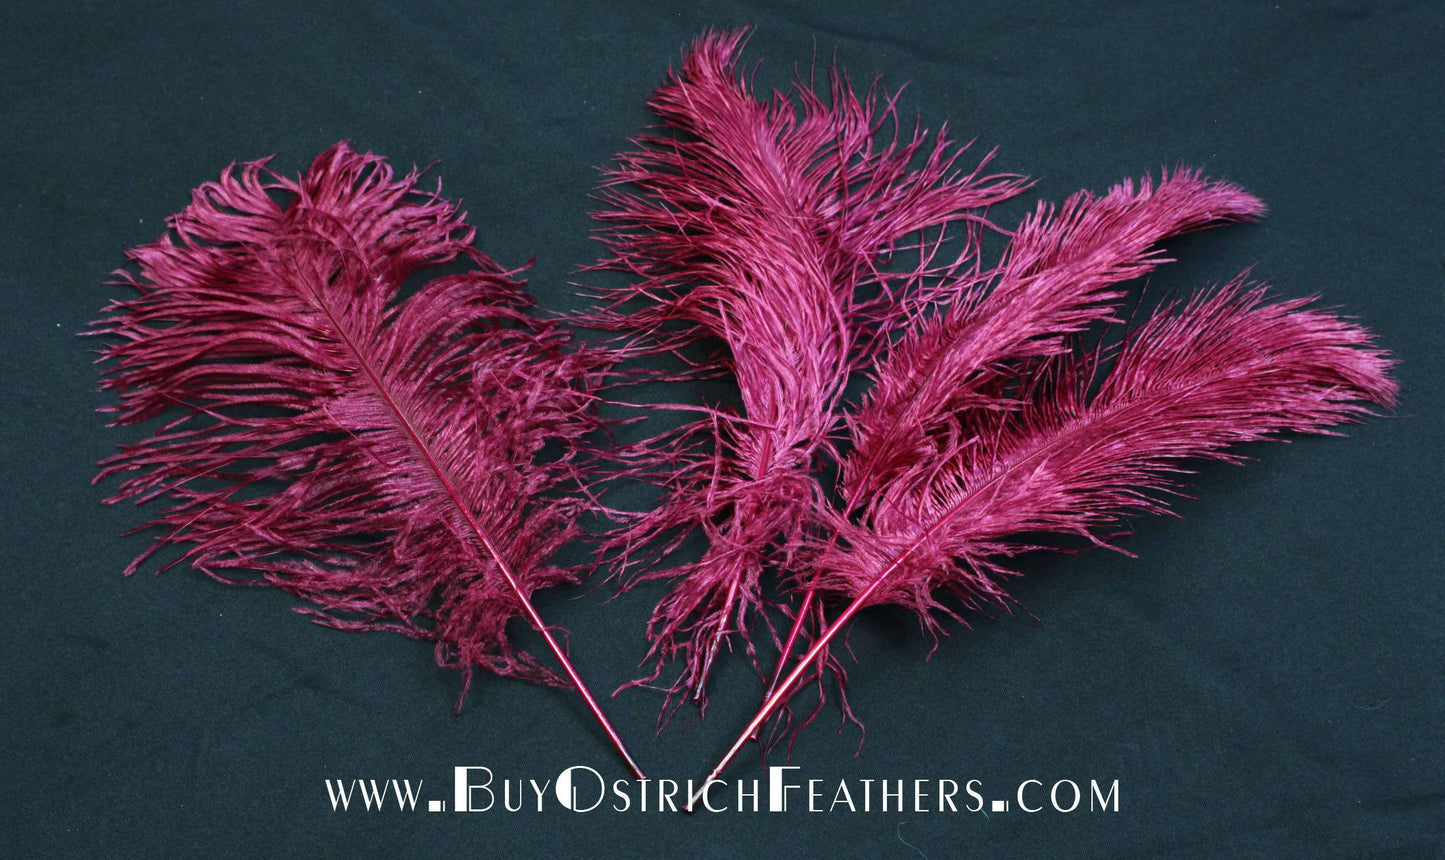 
                  
                    BULK 1/2lb Ostrich Feather Tail Plumes 15-20" (Burgundy) - Buy Ostrich Feathers
                  
                